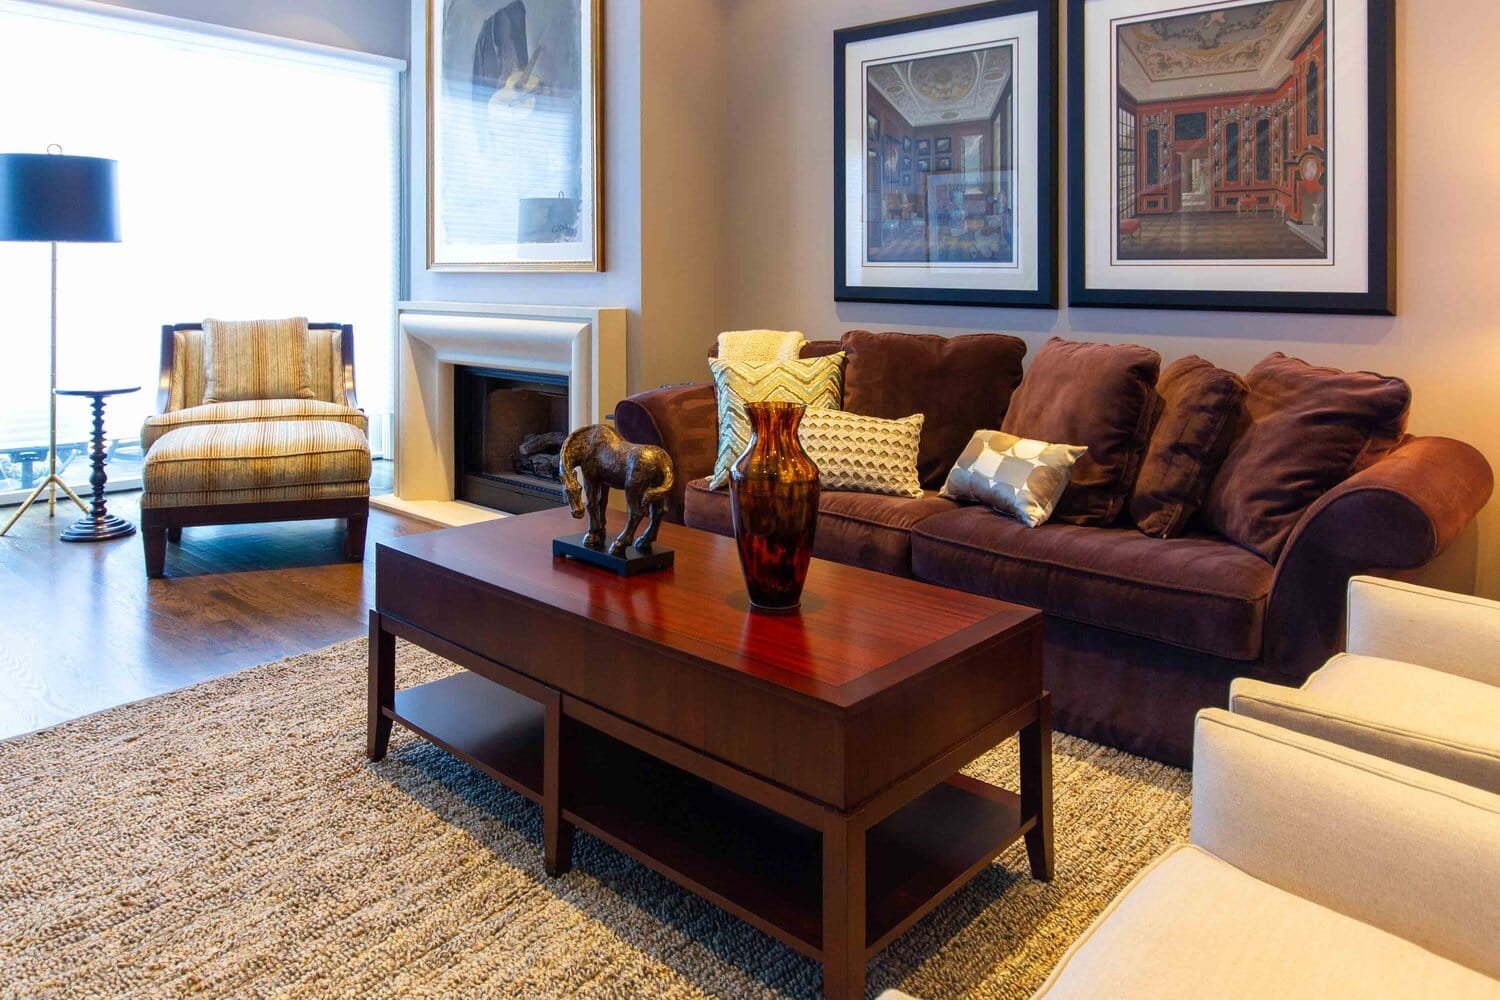 10 Tips for Creating a Stylish Coffee Table — Design Inside